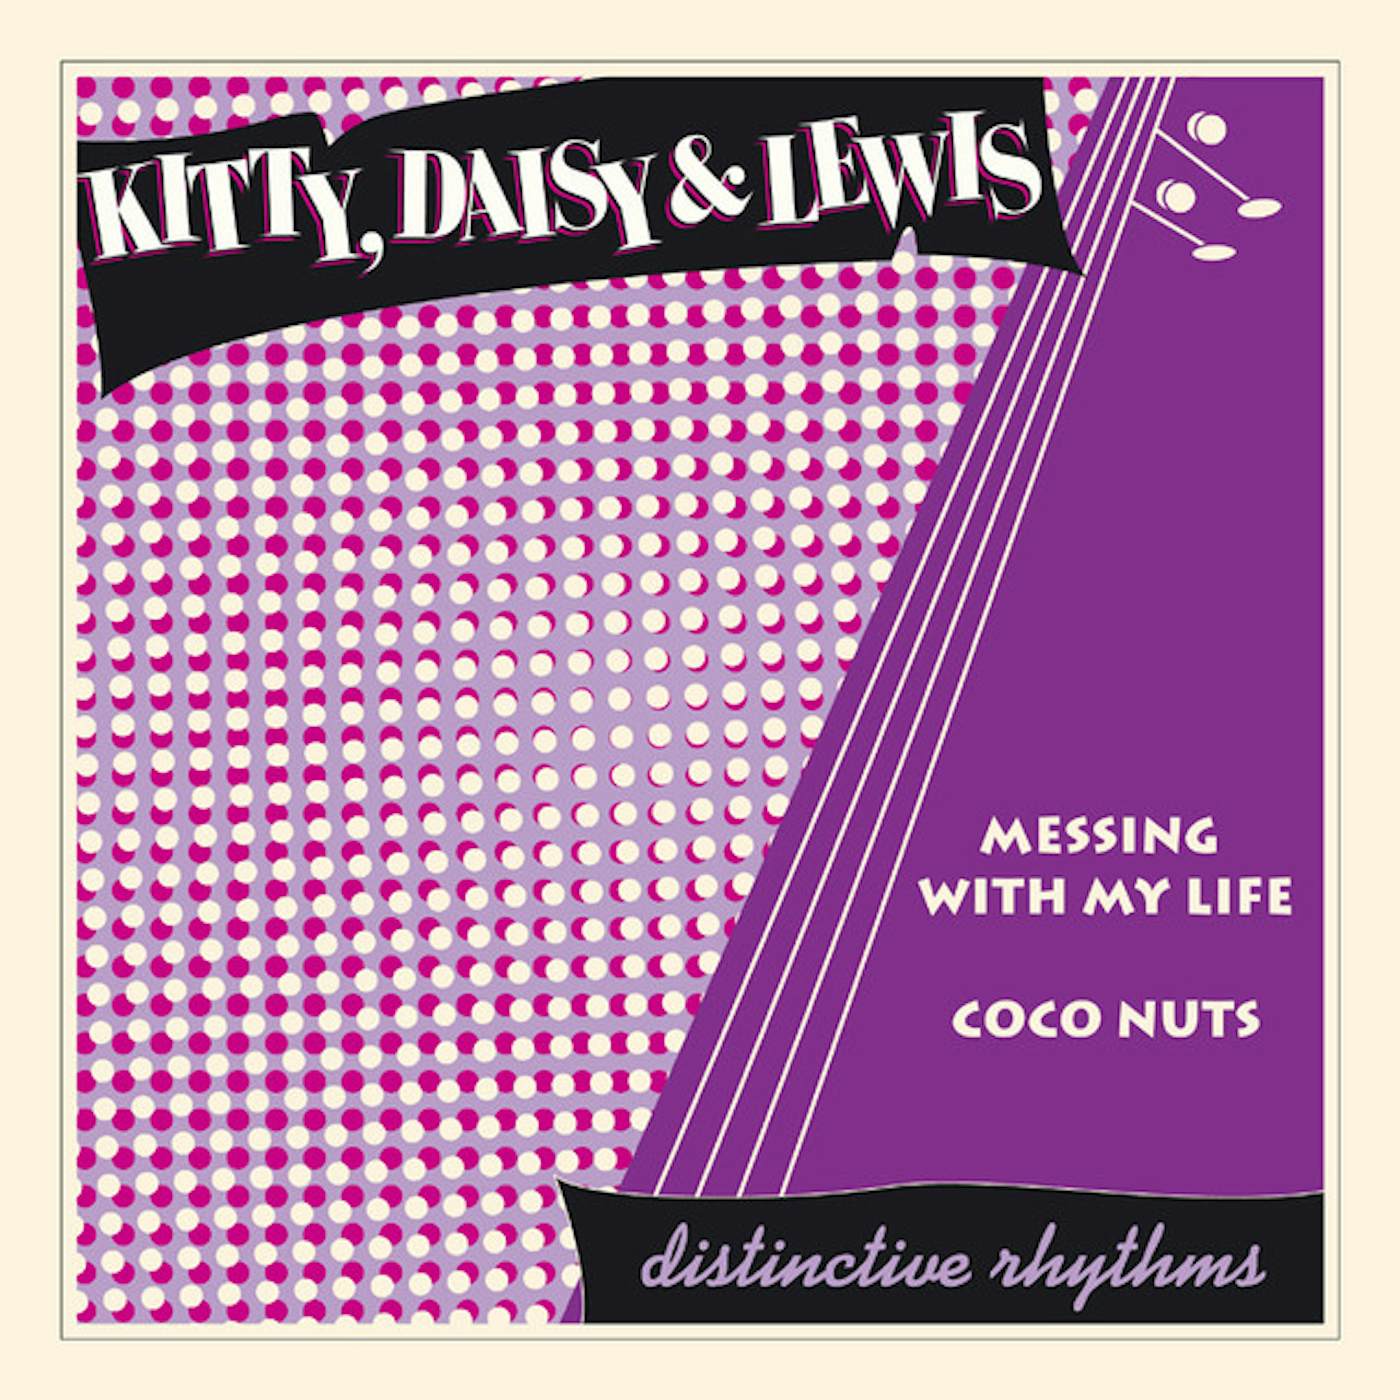 Kitty, Daisy & Lewis Messing With My Life Vinyl Record